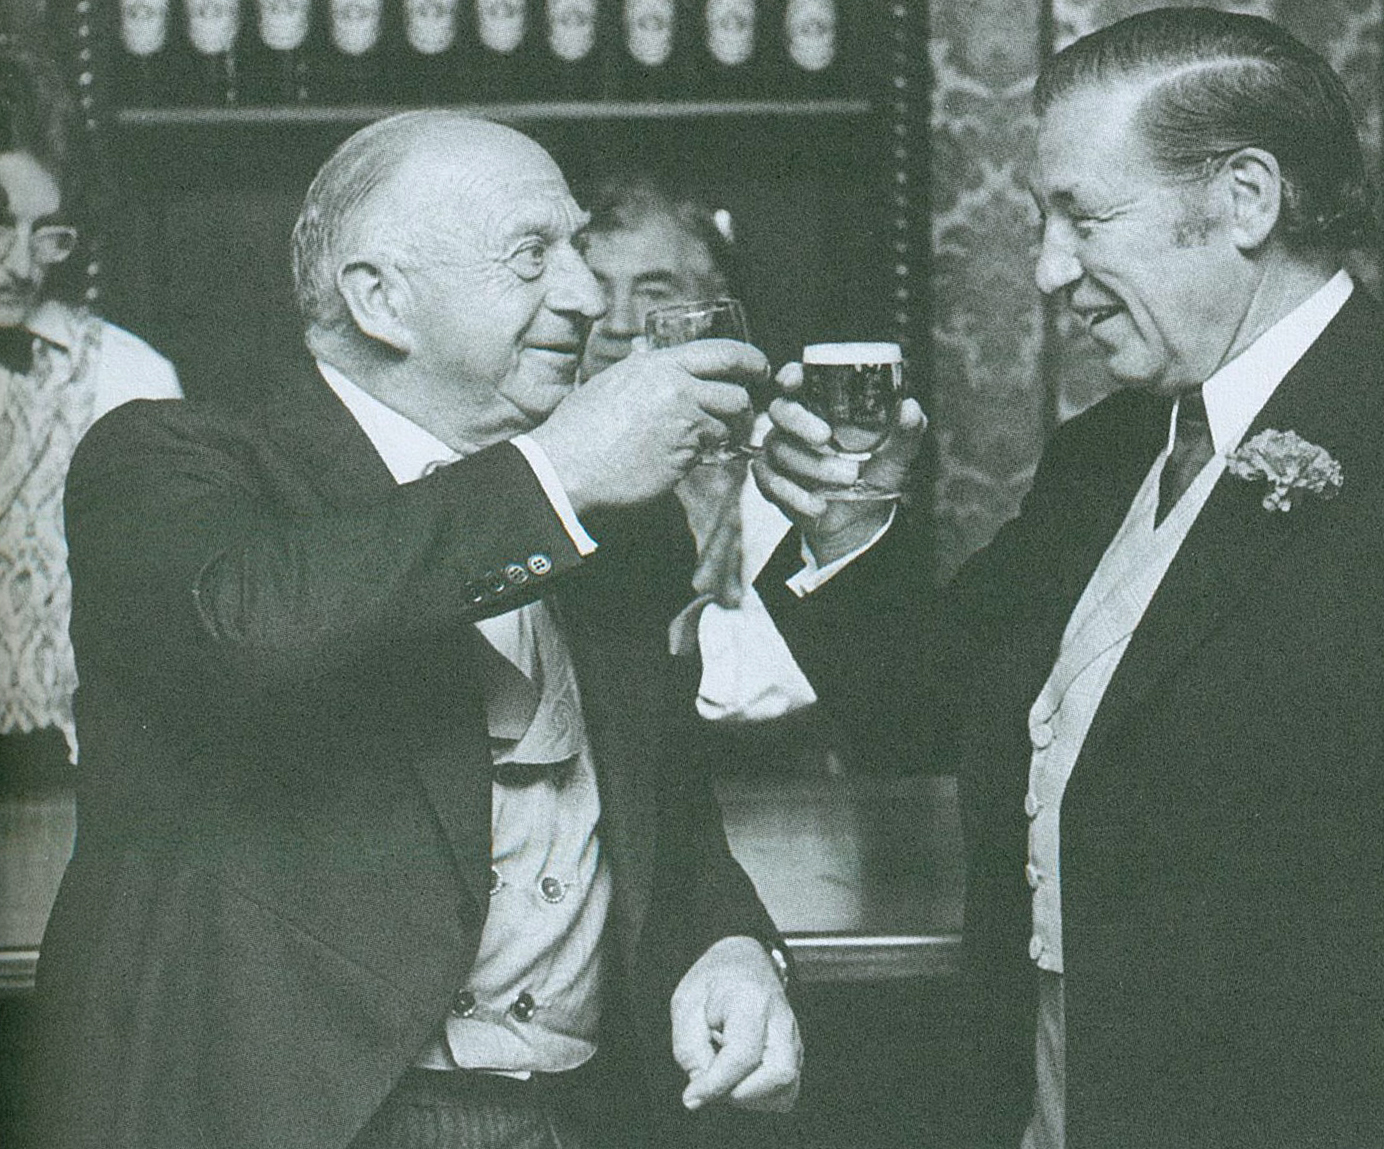 Bolte and Hamer toast each other at the opening of Kryal Castle in Ballarat November 1974 photograph courtesty of the Hamer Family